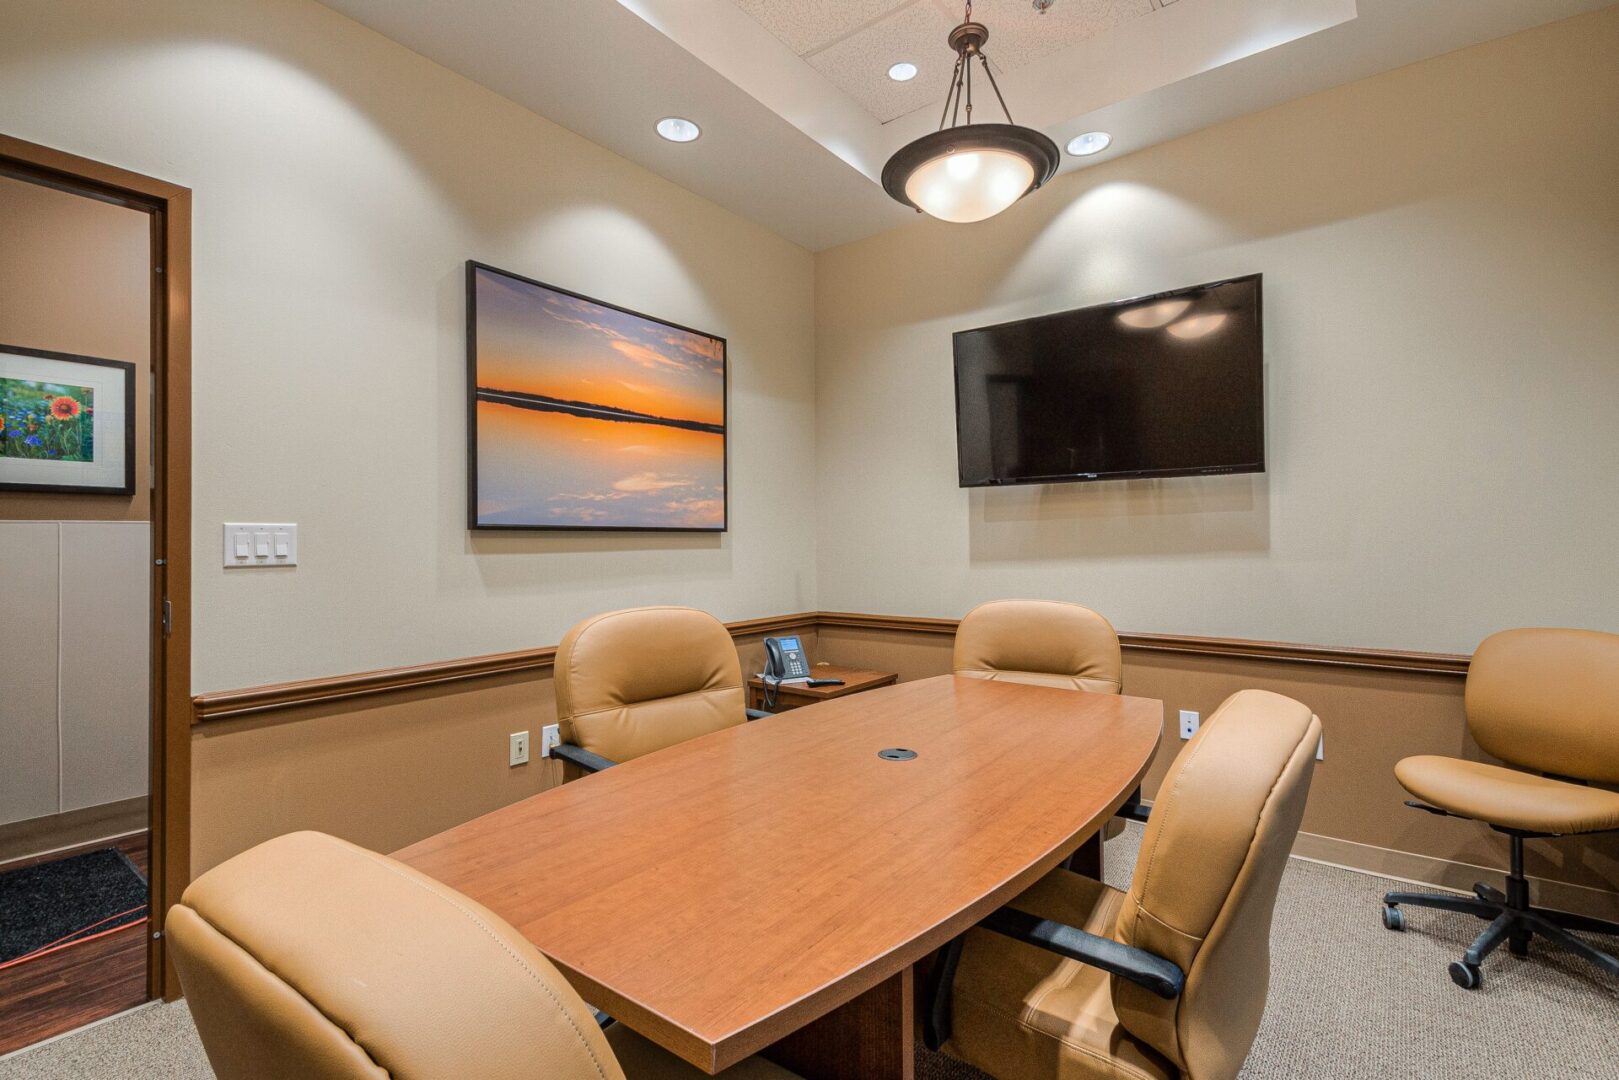 A conference room with a table and chairs, television on the wall.